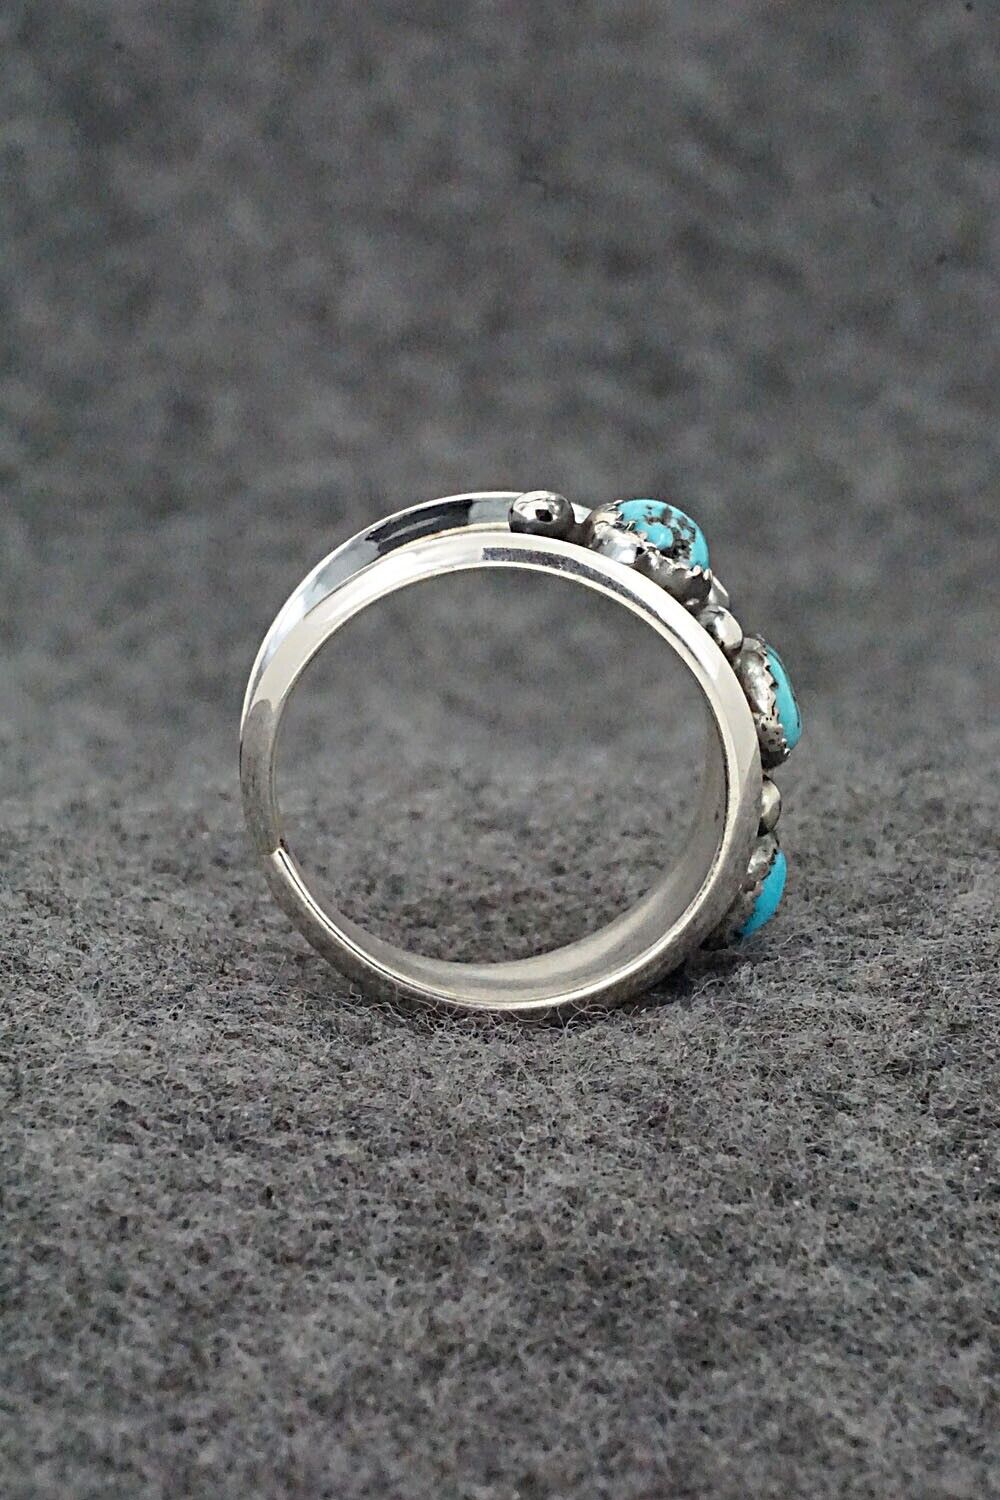 Turquoise & Sterling Silver Ring - Paul Largo - Size 10.5